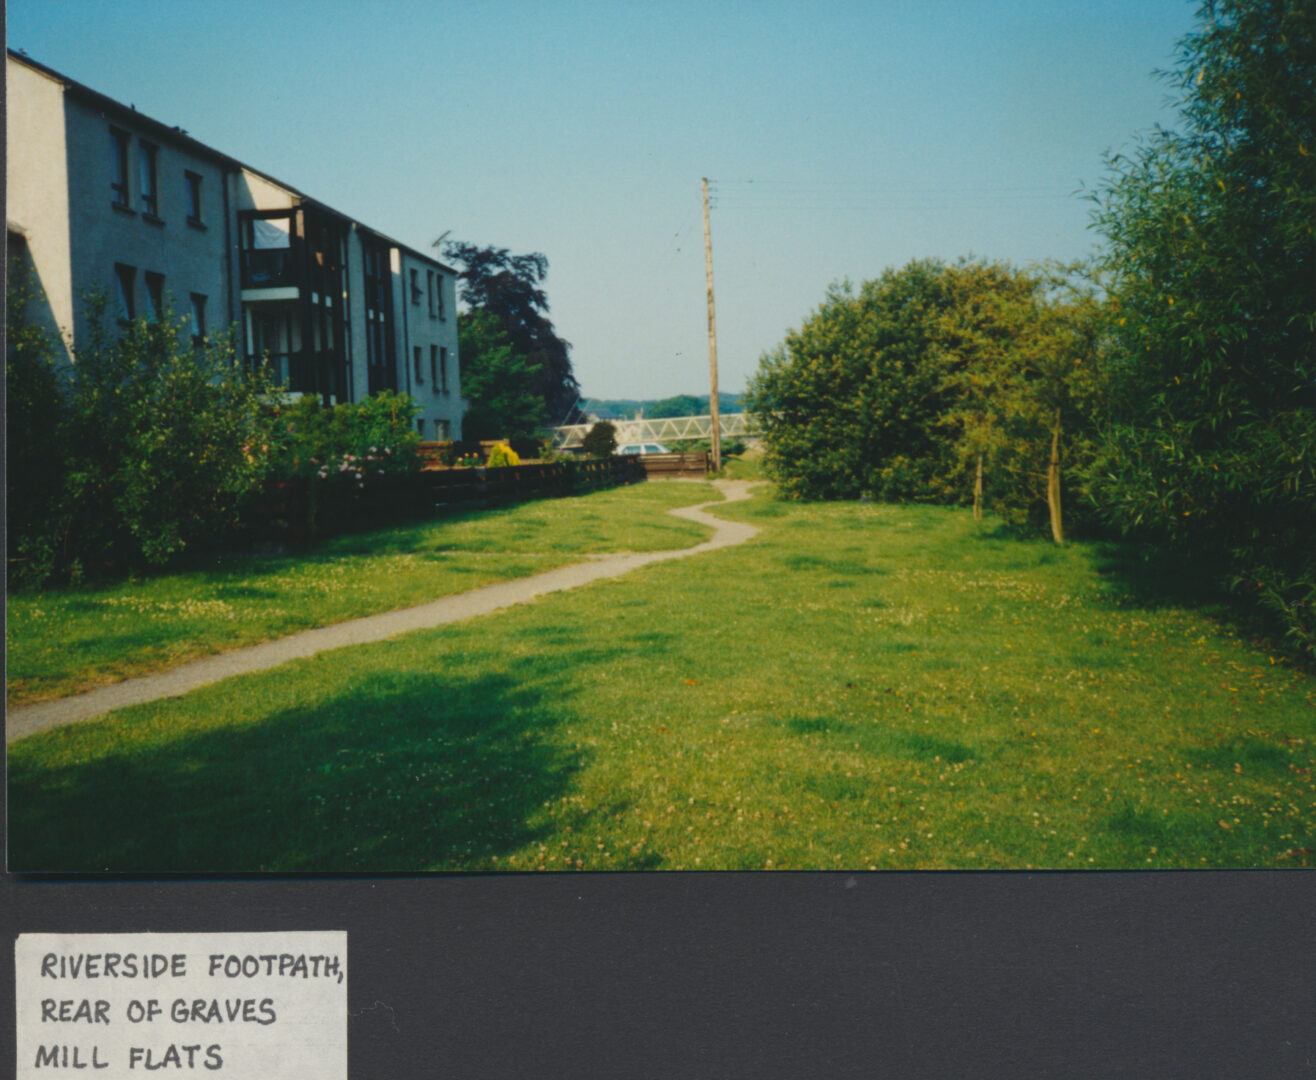 Graves Mill flats rear view to river with footpath 1989 photo